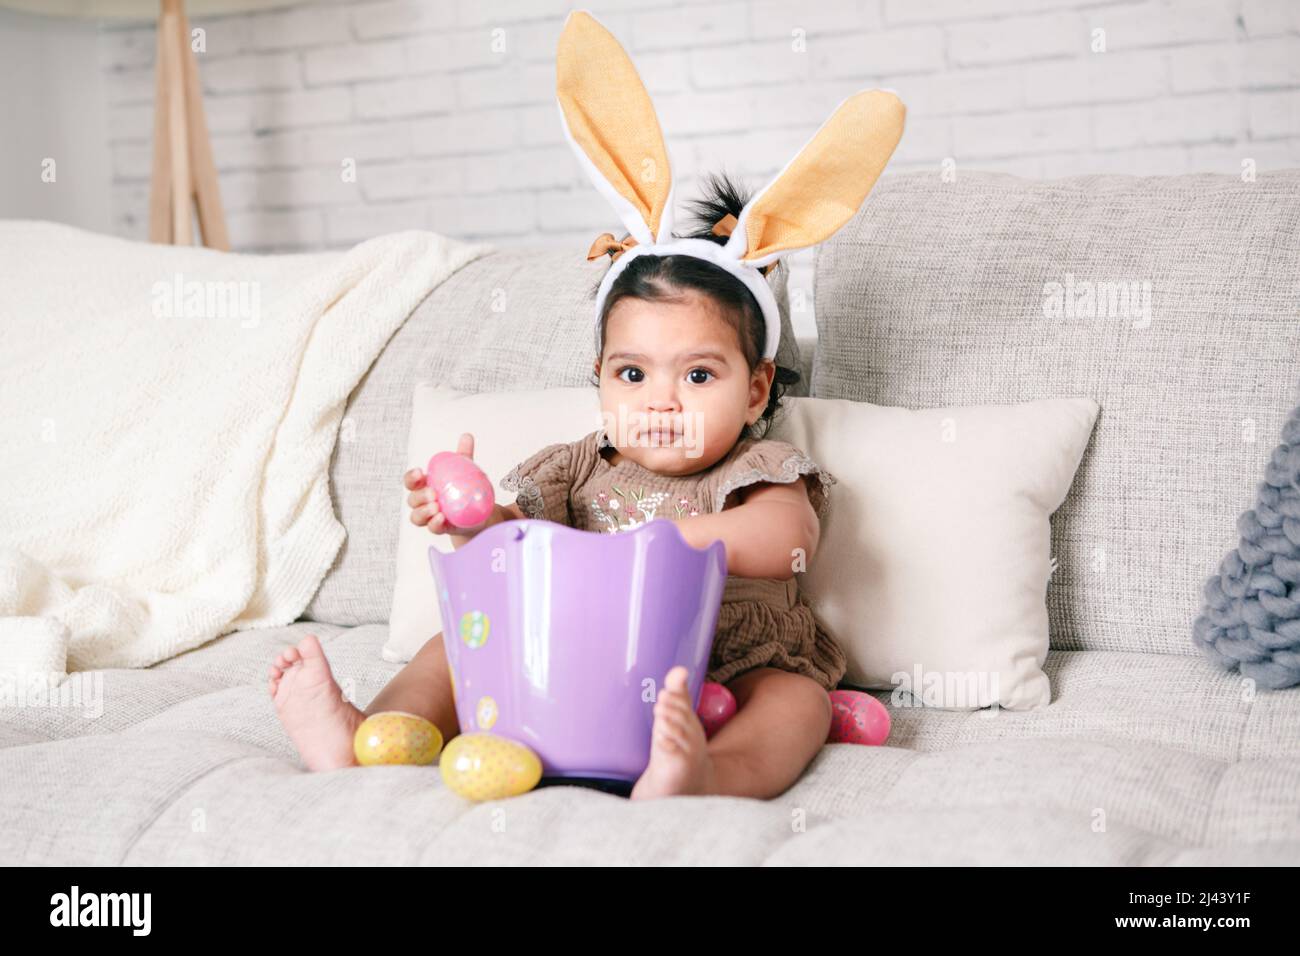 Cute Indian baby girl with pink bunny ears and basket of colorful eggs celebrating Easter holiday. Stock Photo